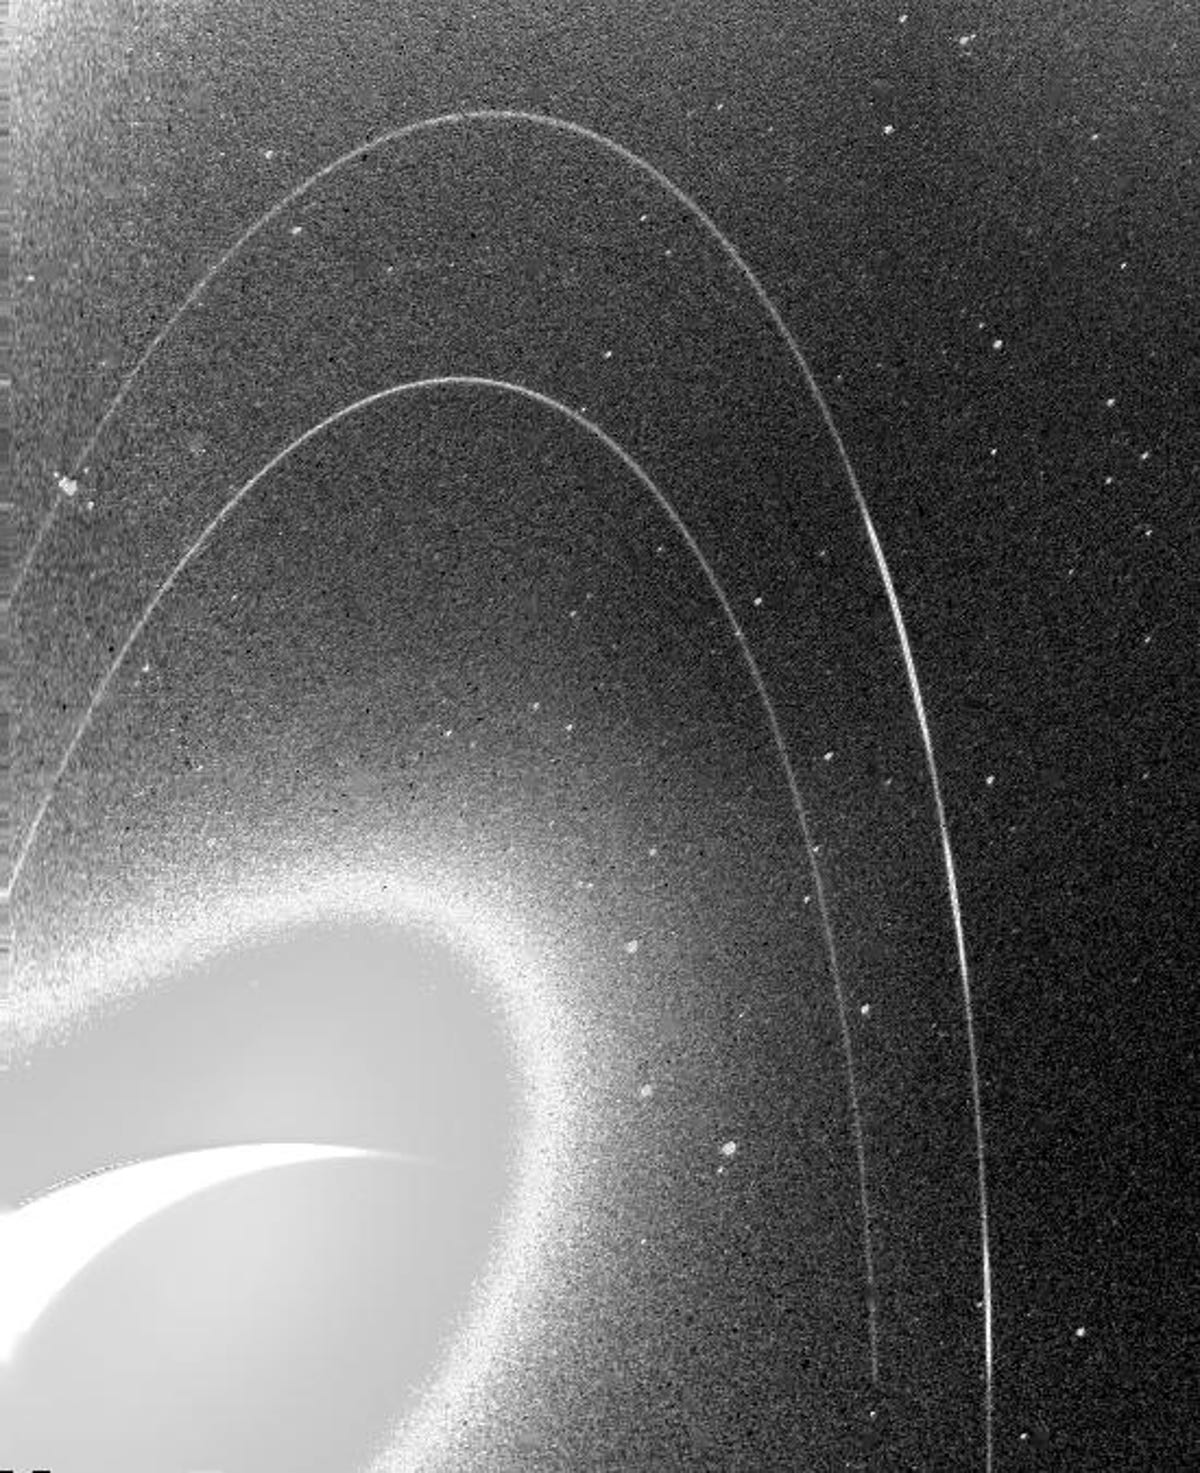 A grainy, black and white image shows Neptune's frail rings.